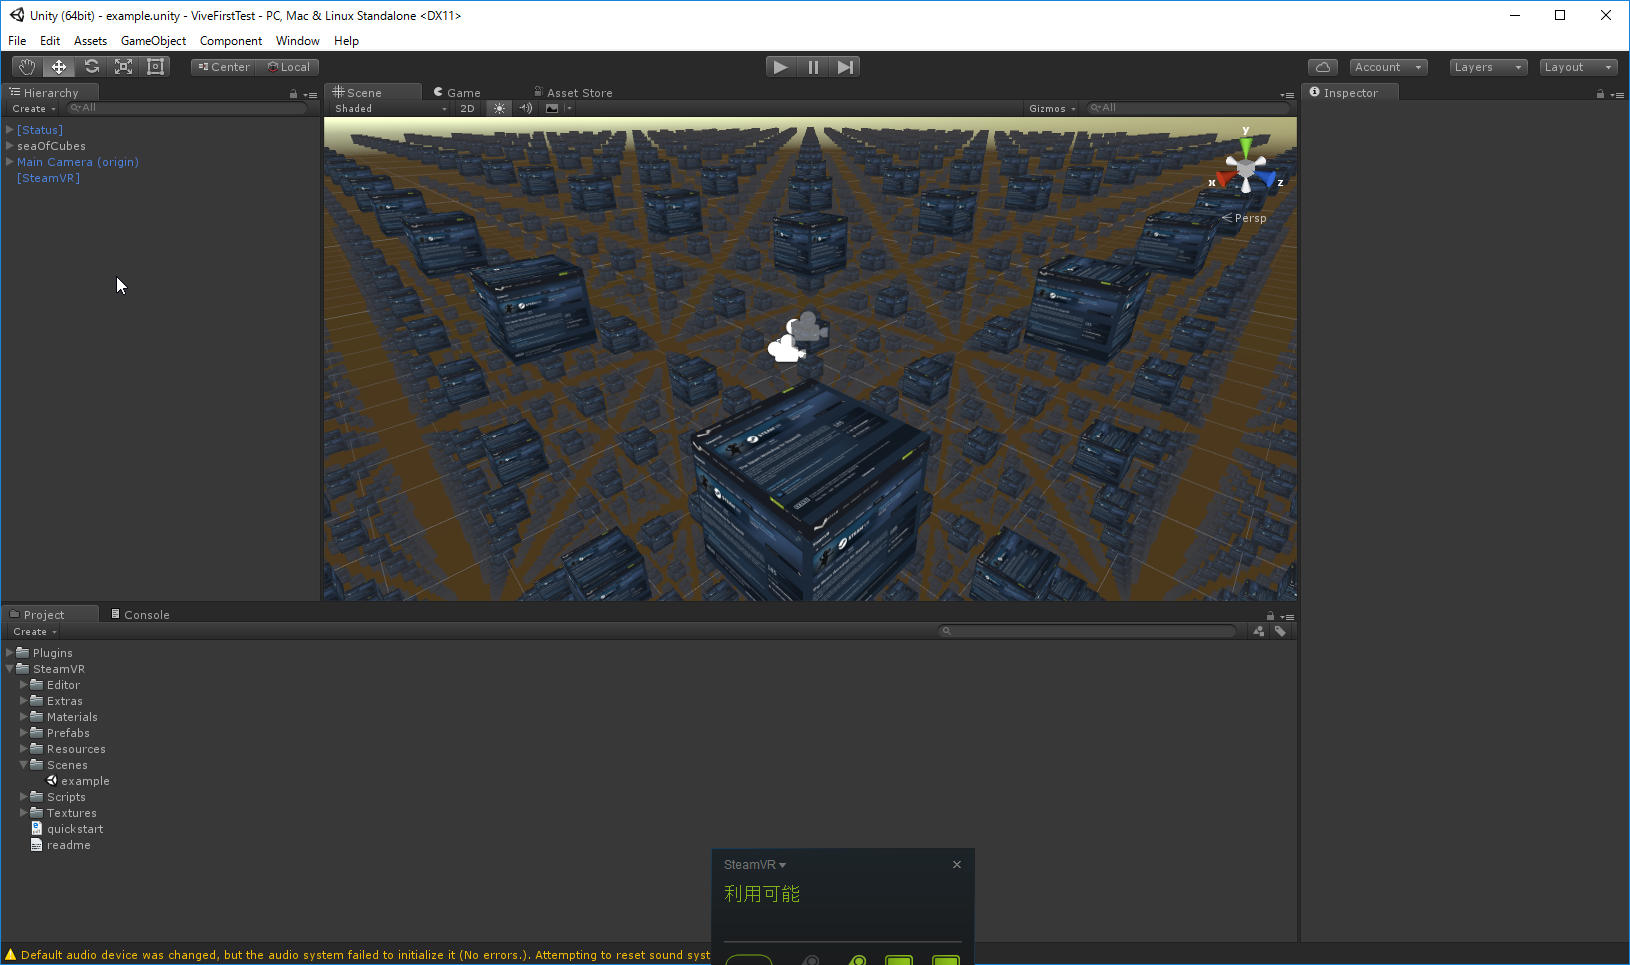 SnapCrab_Unity (64bit) - exampleunity - ViveFirstTest - PC Mac & Linux Standalone DX11_2016-7-23_23-12-38_No-00.png